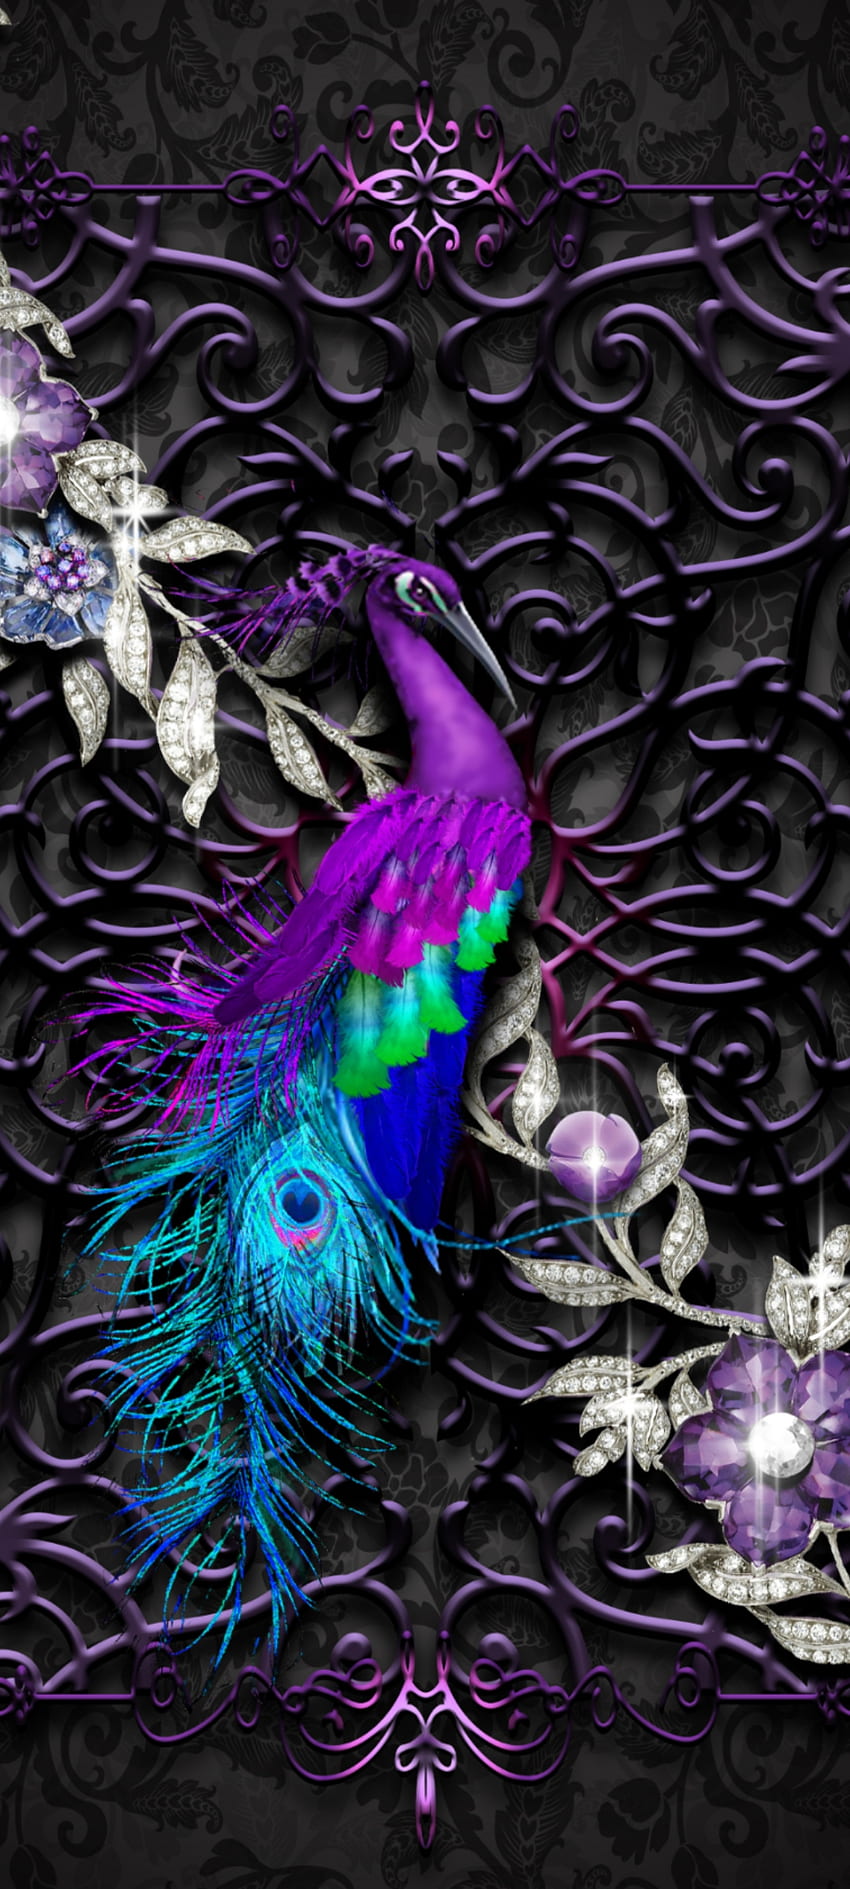 About Peacock Live Wallpaper  HD Colorful Backgrounds Google Play  version   Apptopia